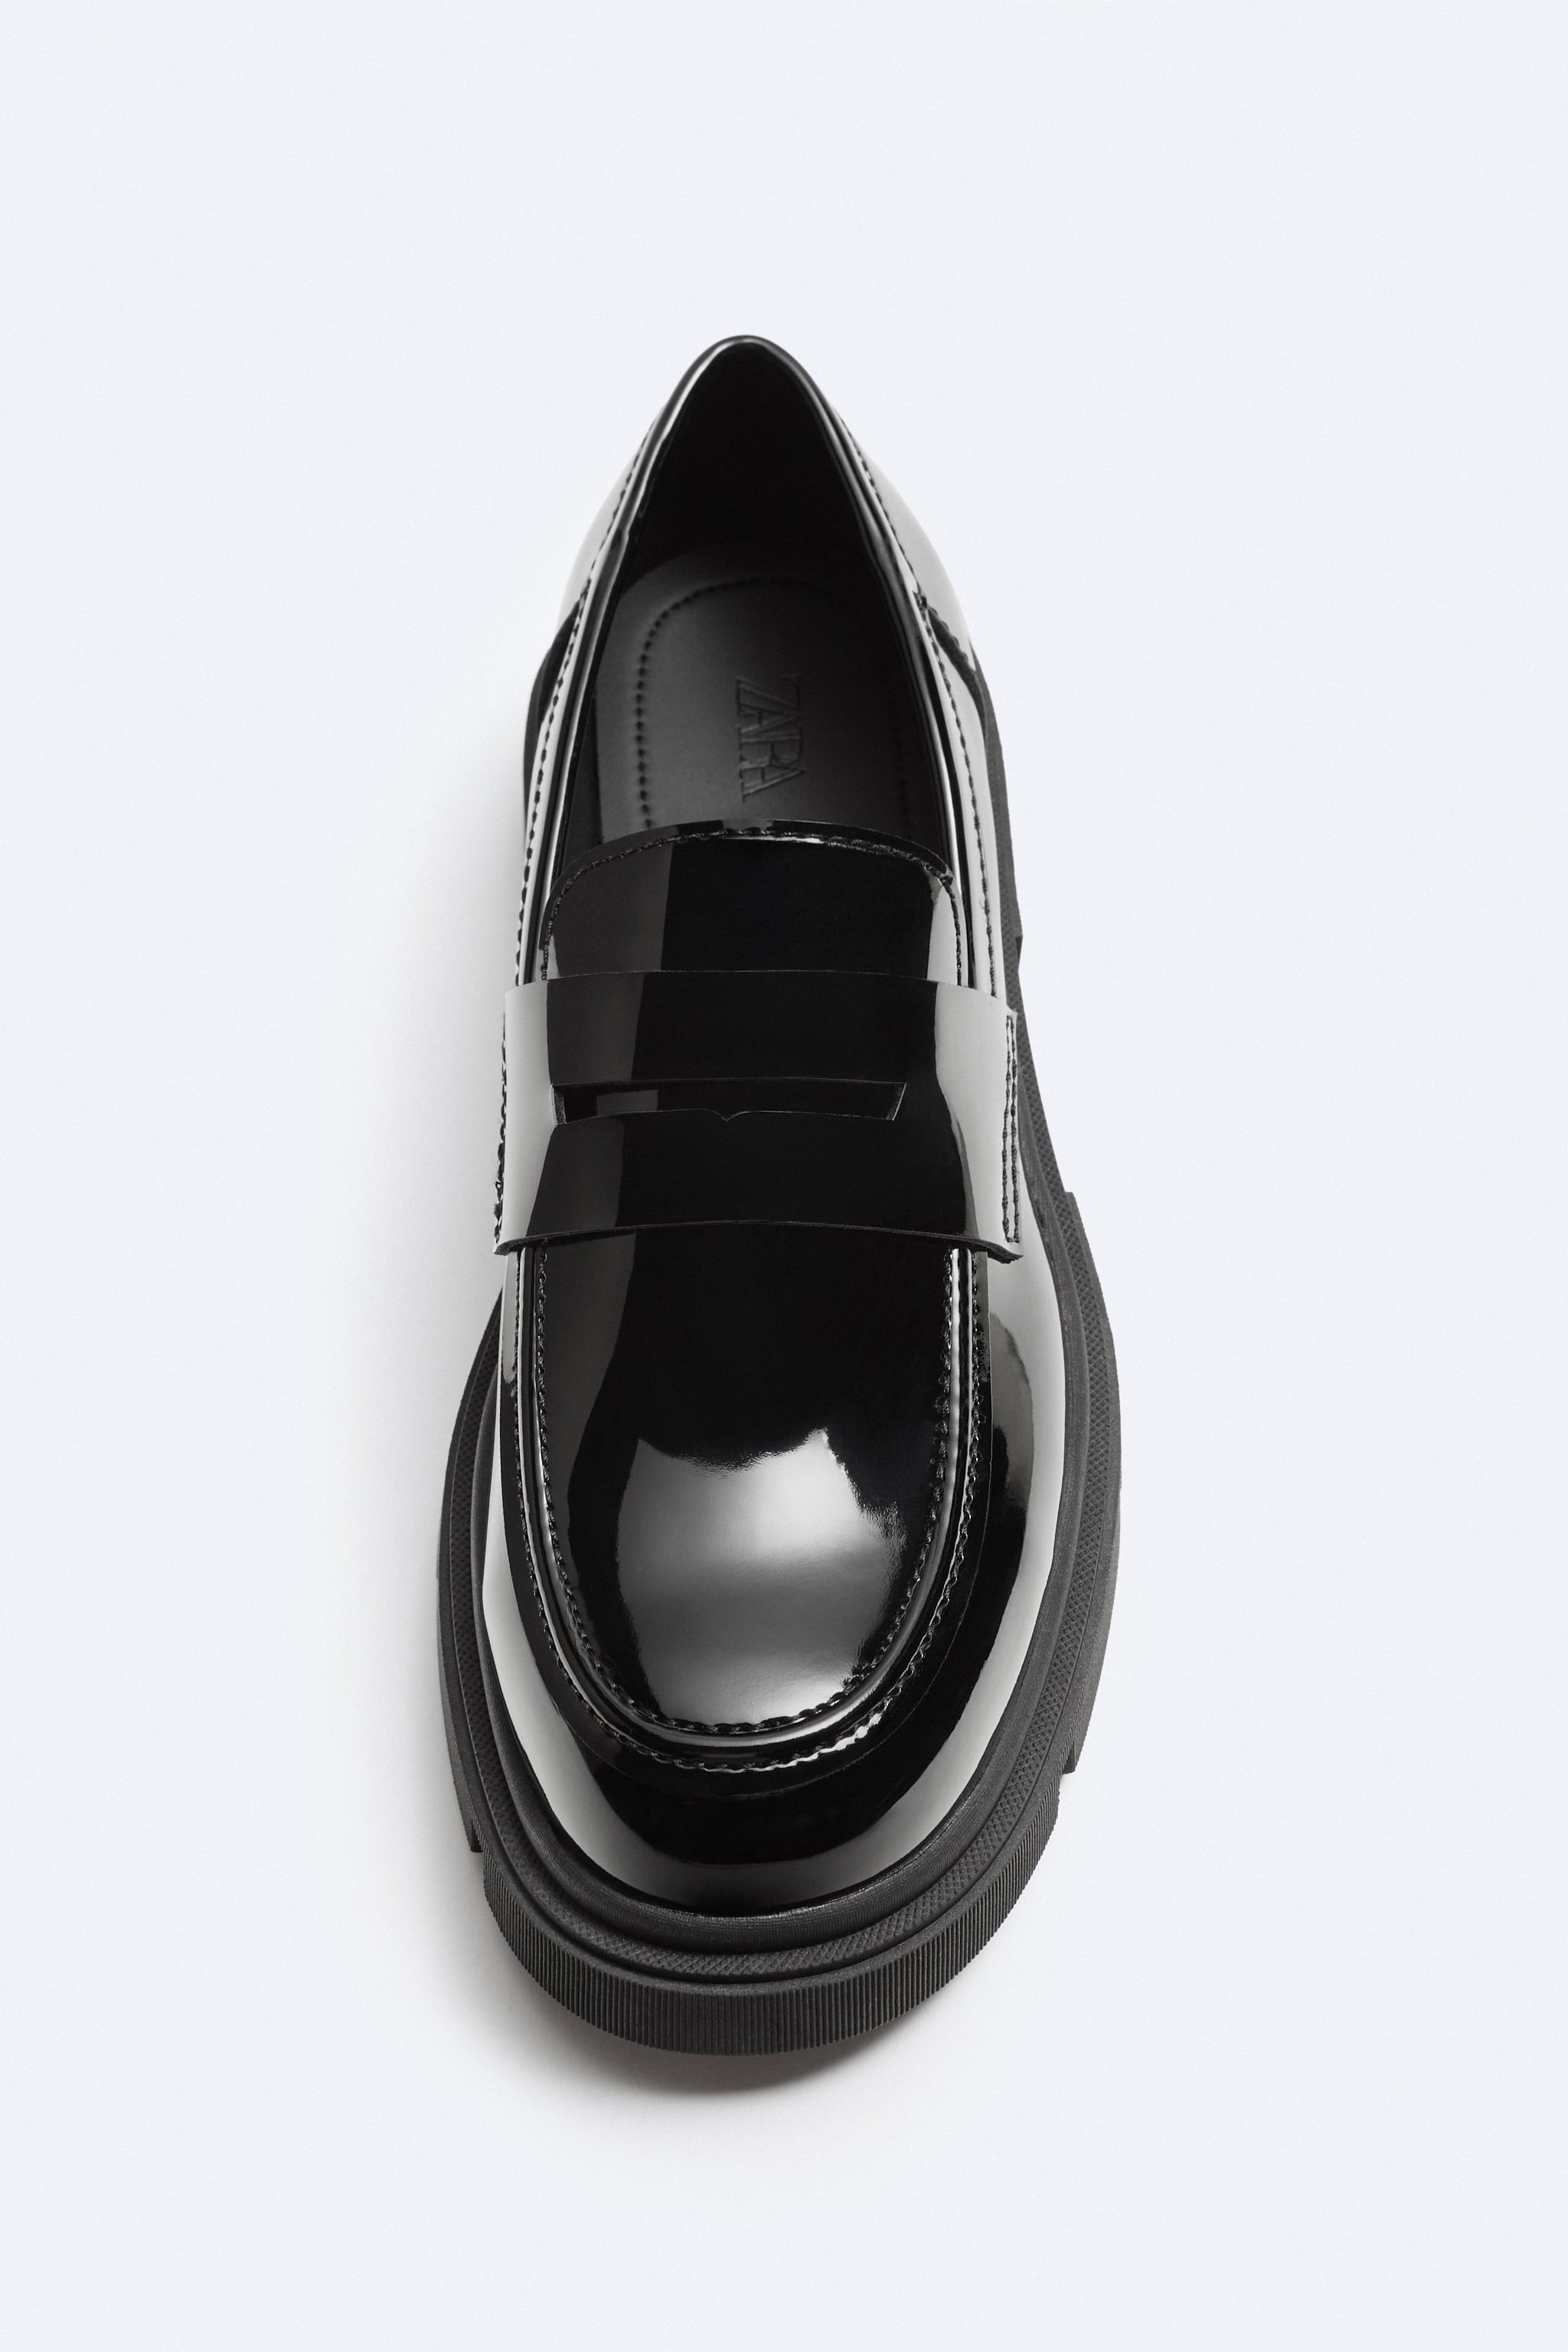 CHUNKY SOLE PATENT FINISH PENNY LOAFERS